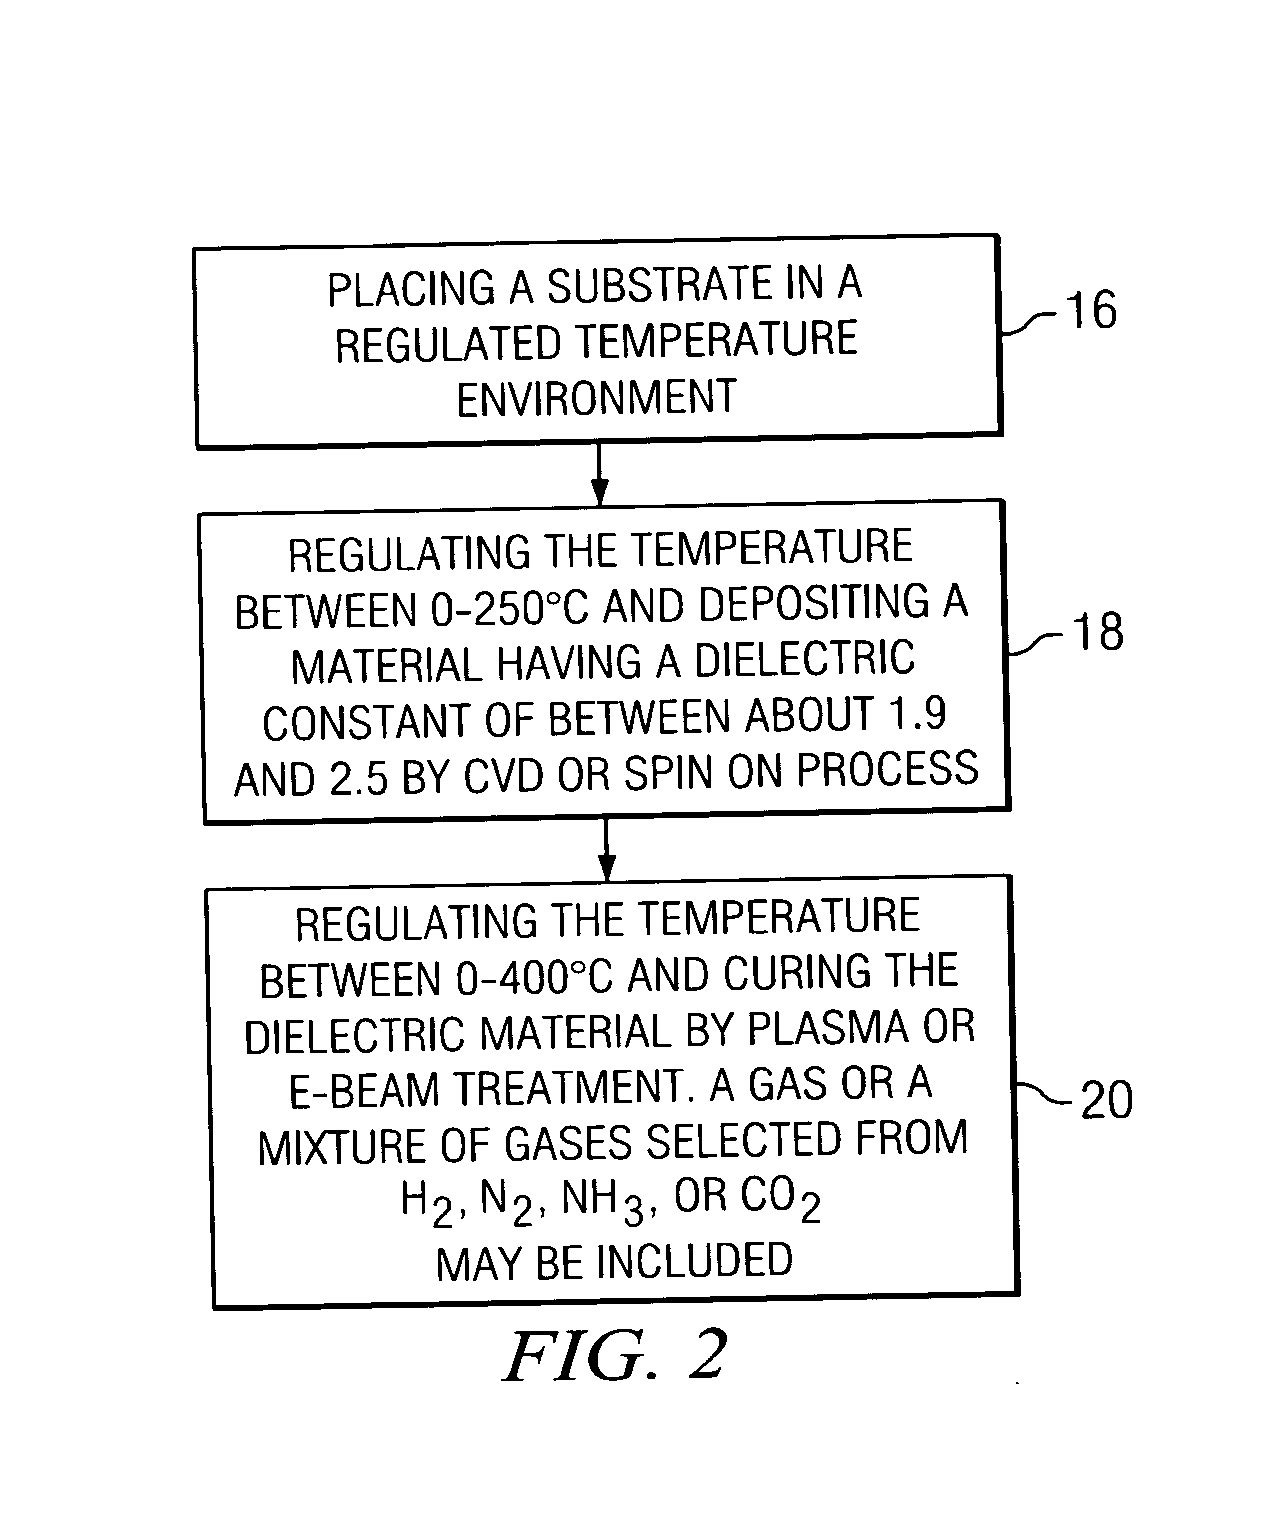 Method for ultra low-K dielectric deposition